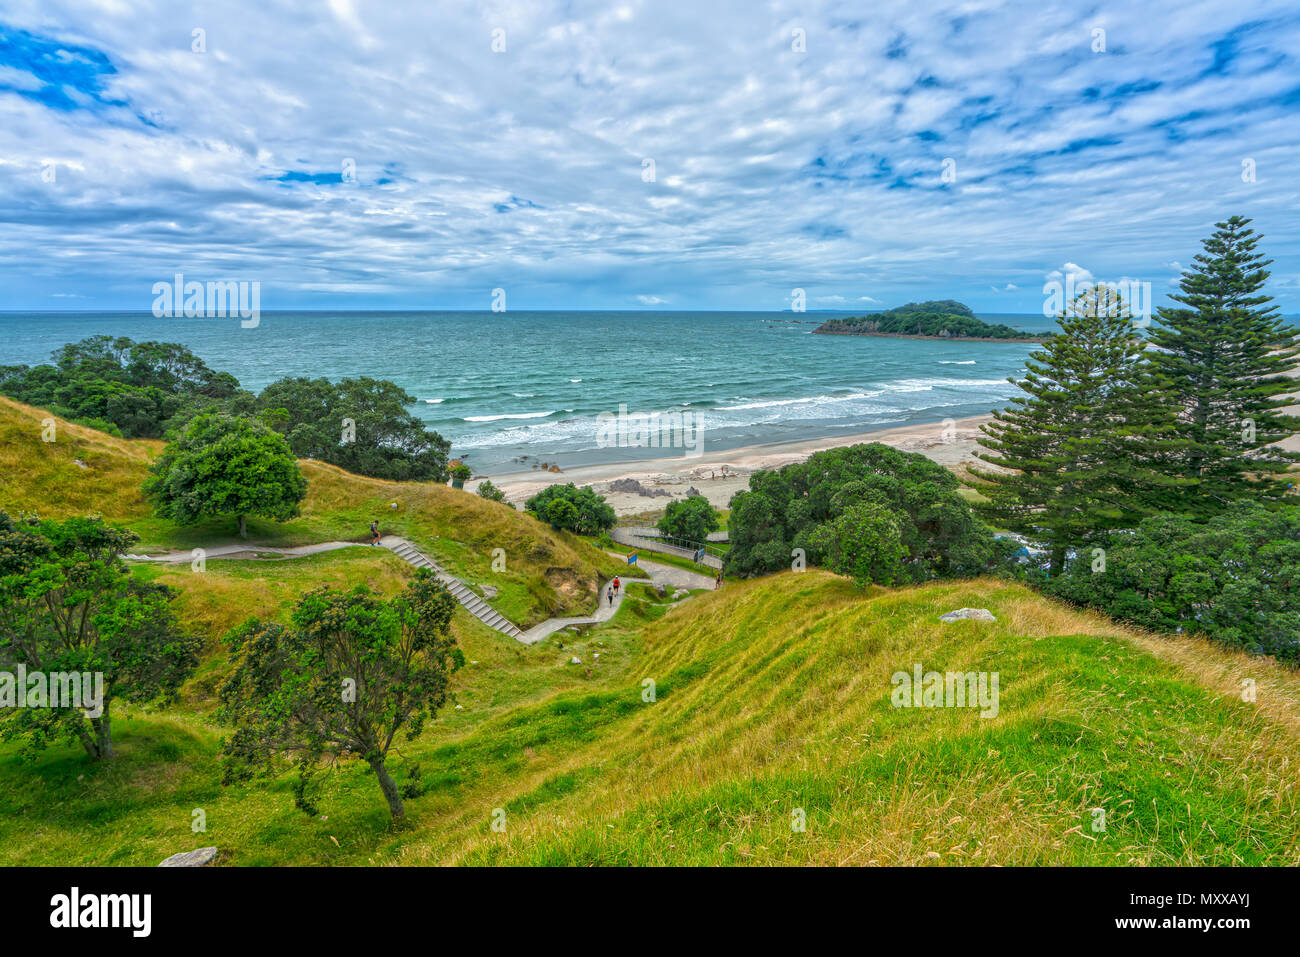 On Mount Maunganui capturing the trail and beach. Stock Photo